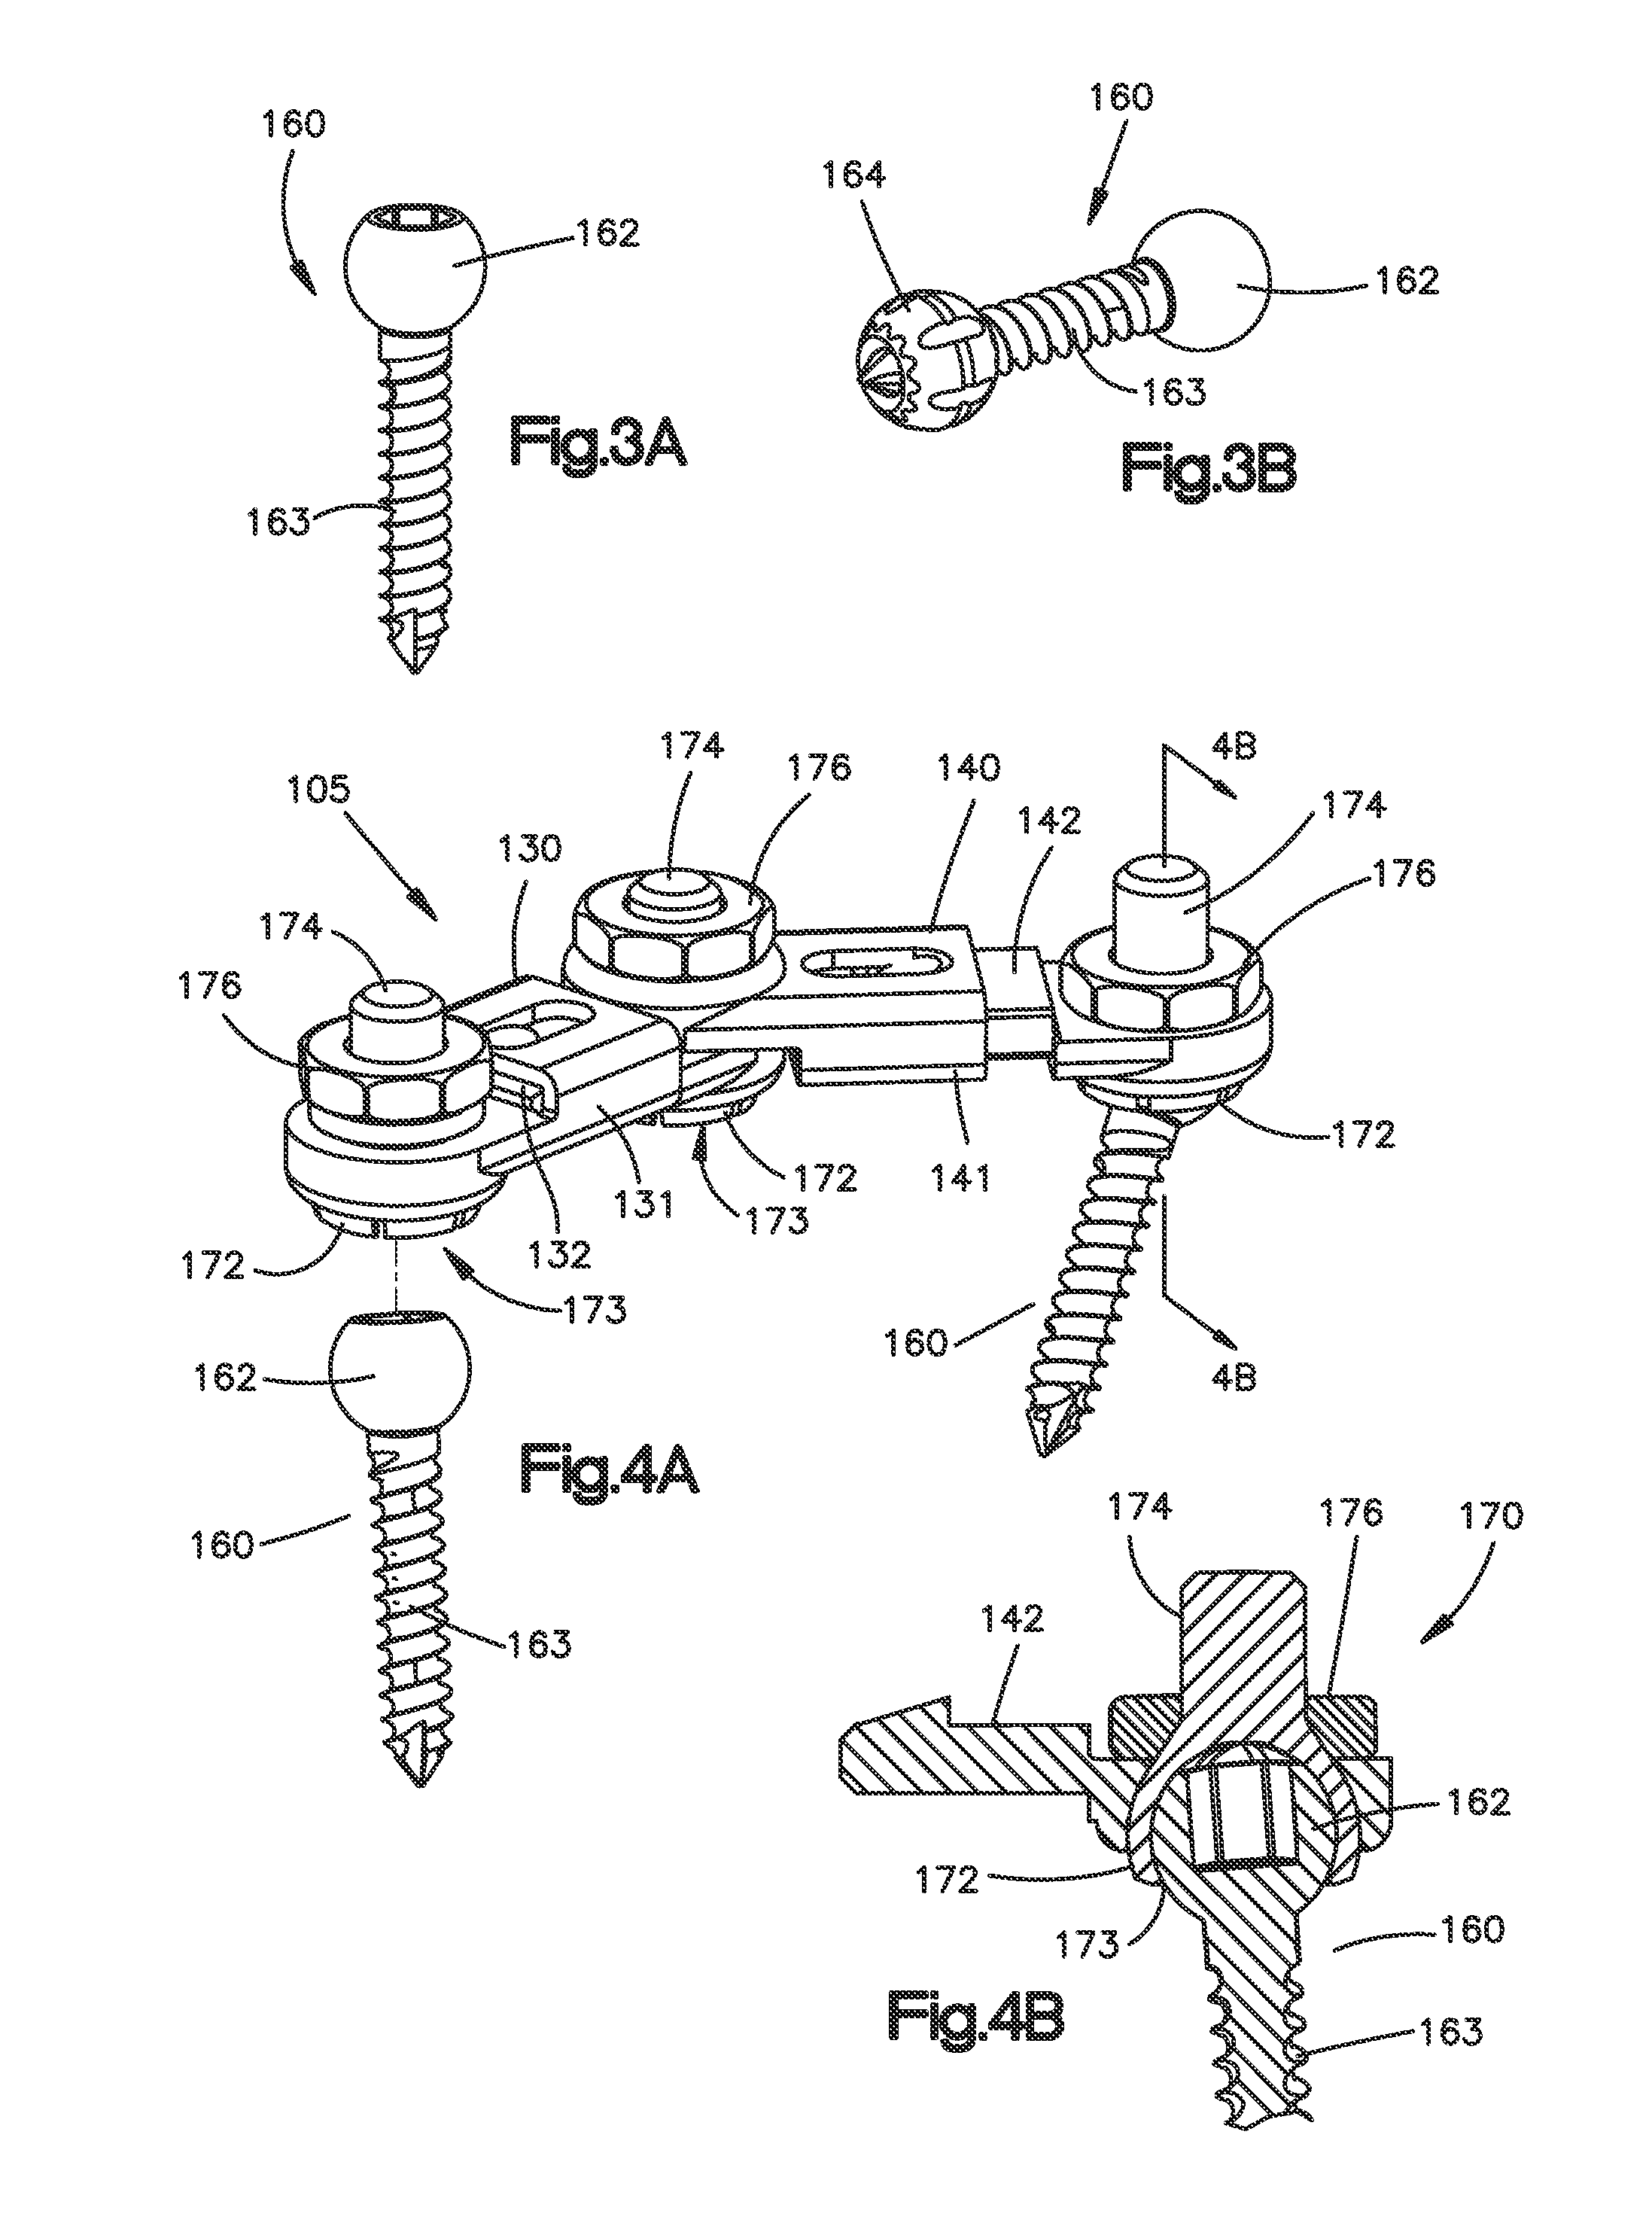 Interspinous spacer assembly